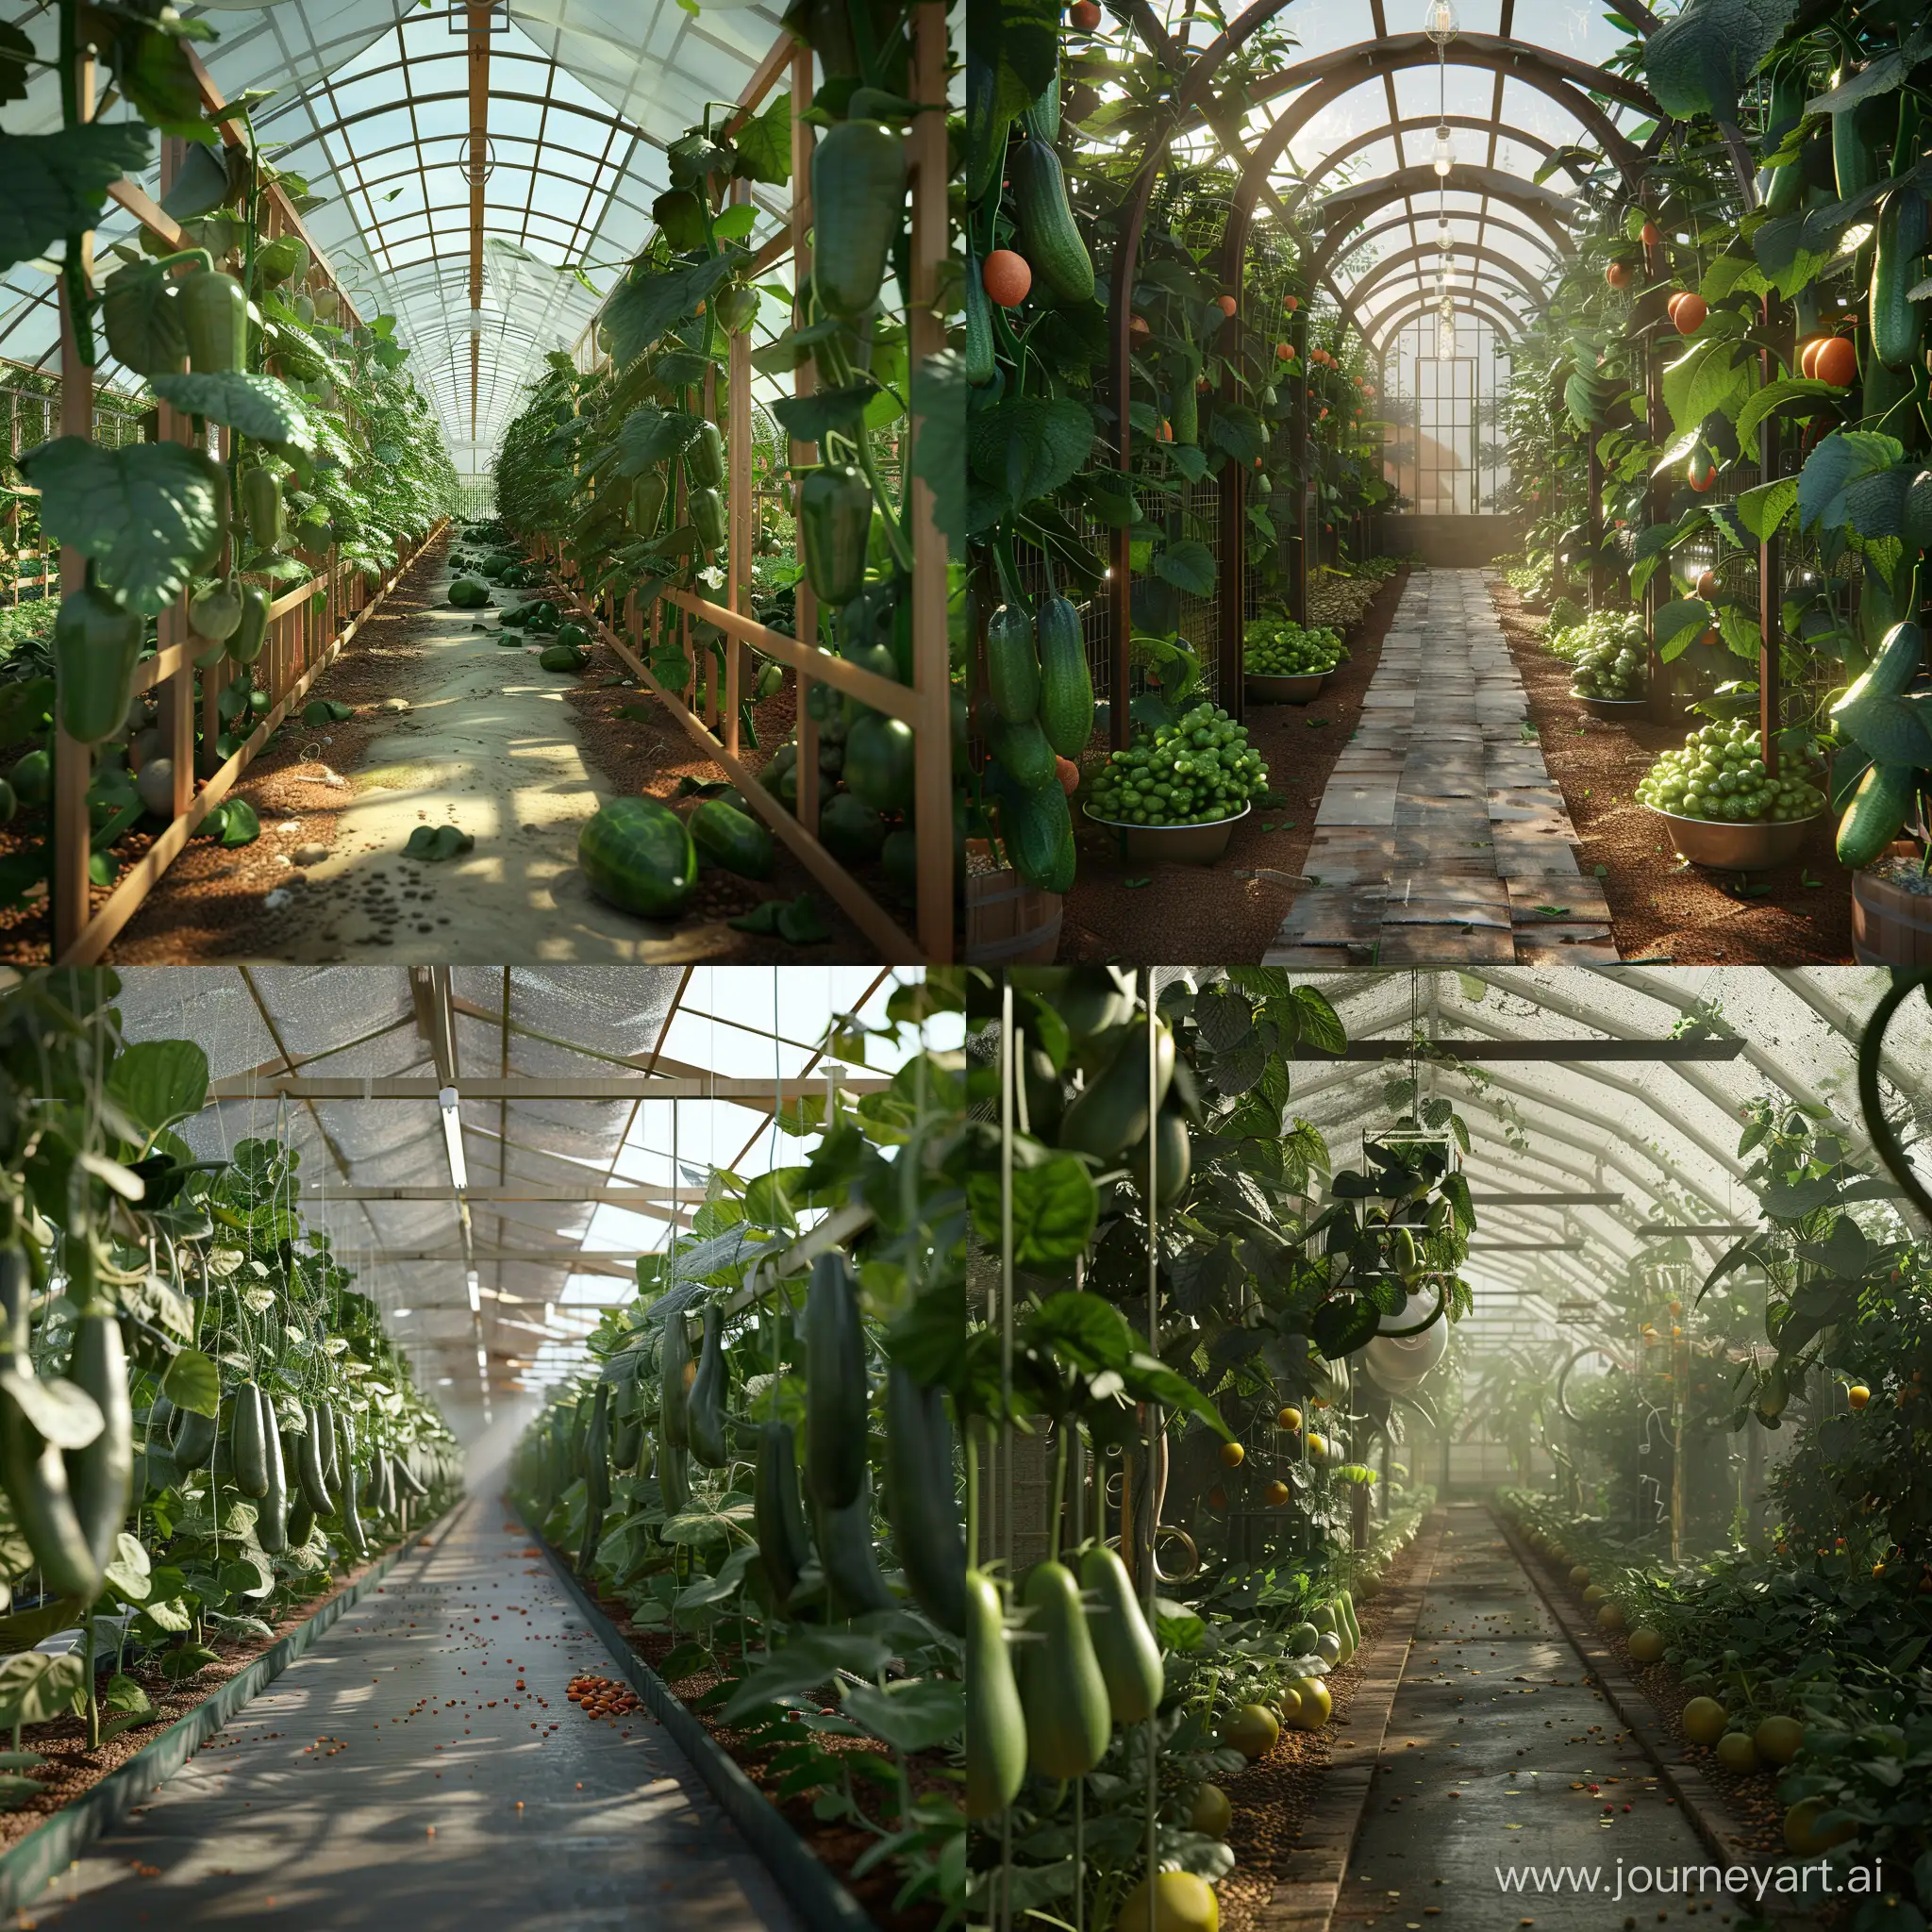 Lush-Greenhouse-Filled-with-Cucumber-Vines